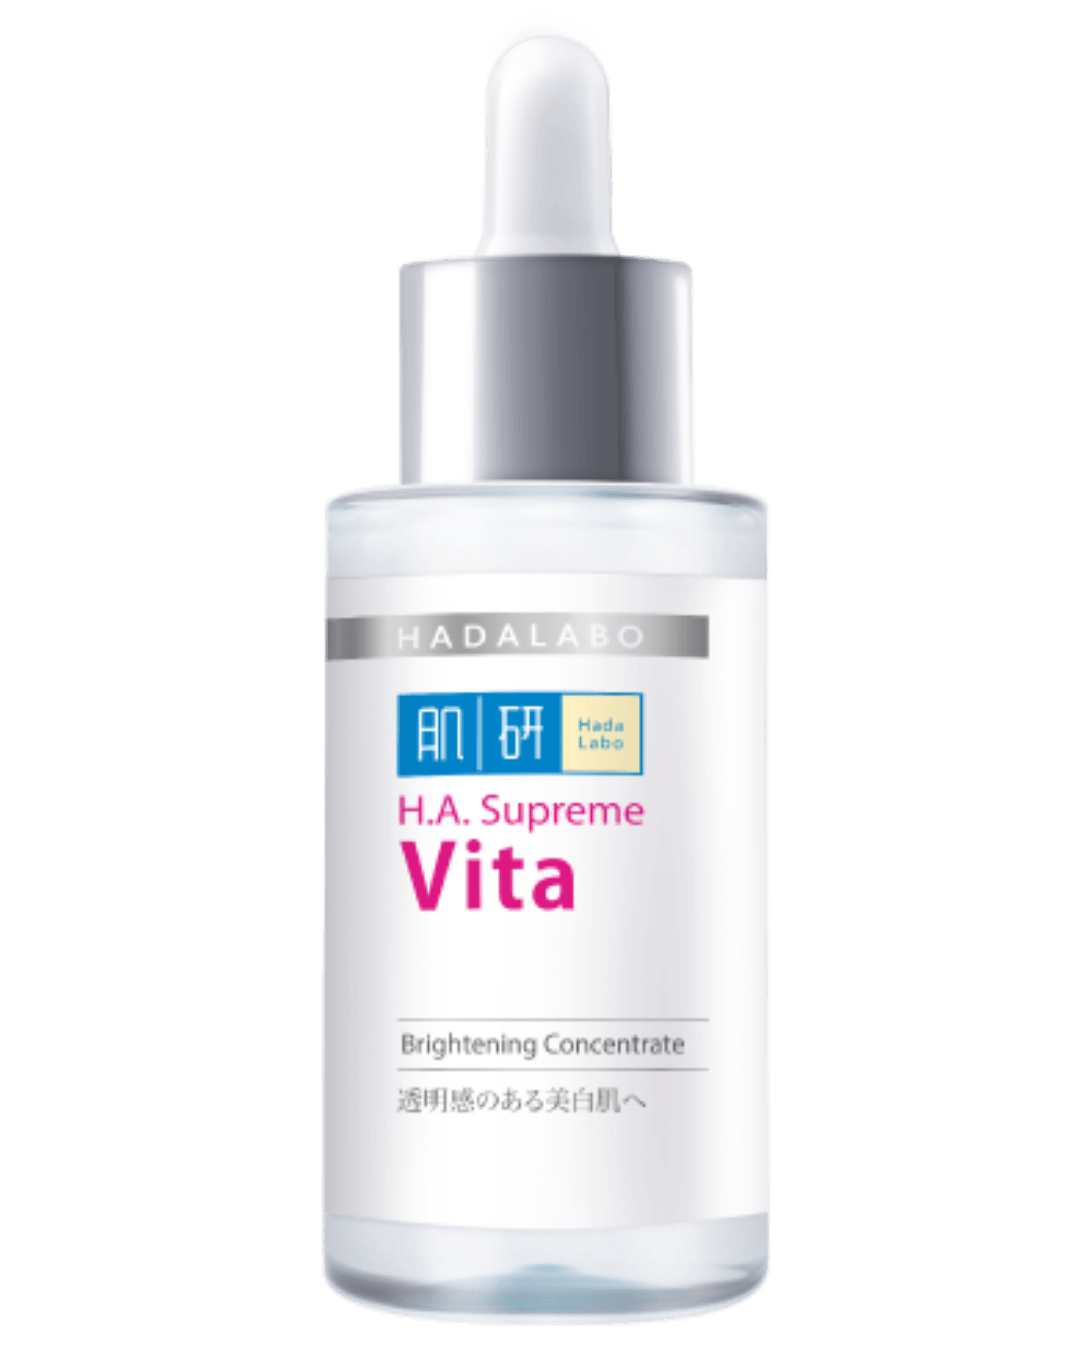 Daily Vanity Beauty Awards 2024 Best Skincare Hada Labo HA Supreme Vita Brightening Concentrate Voted By Beauty Experts